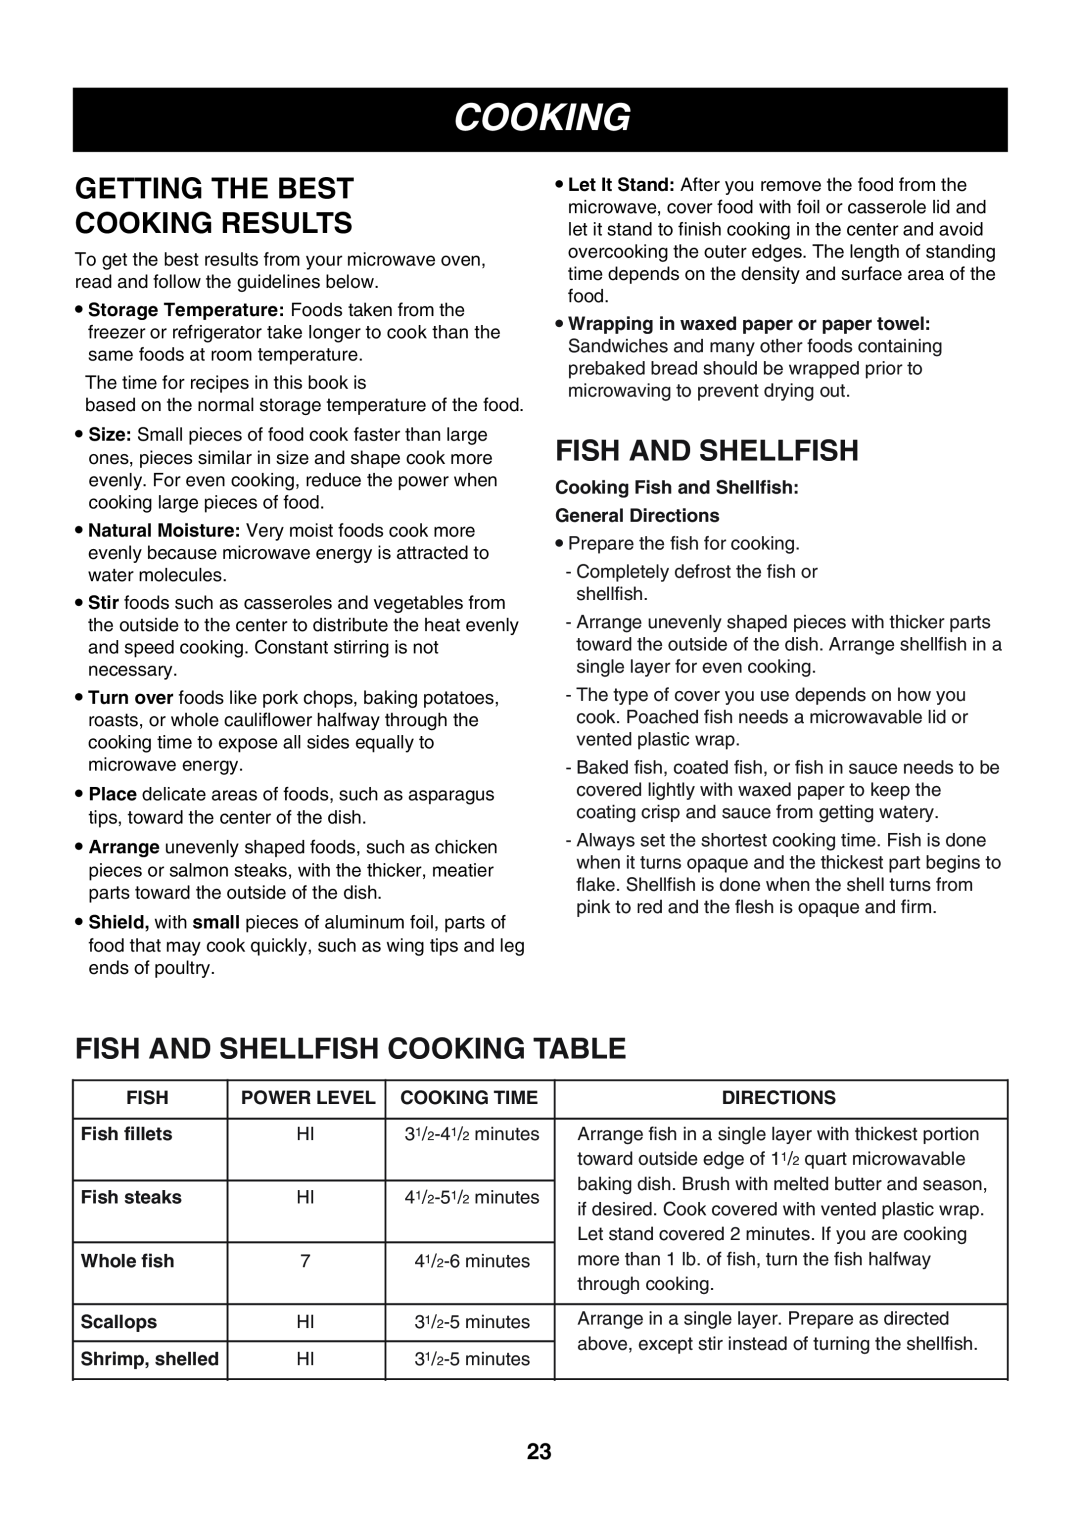 Minolta LMVM2085SB owner manual Getting The Best Cooking Results, Fish And Shellfish Cooking Table 